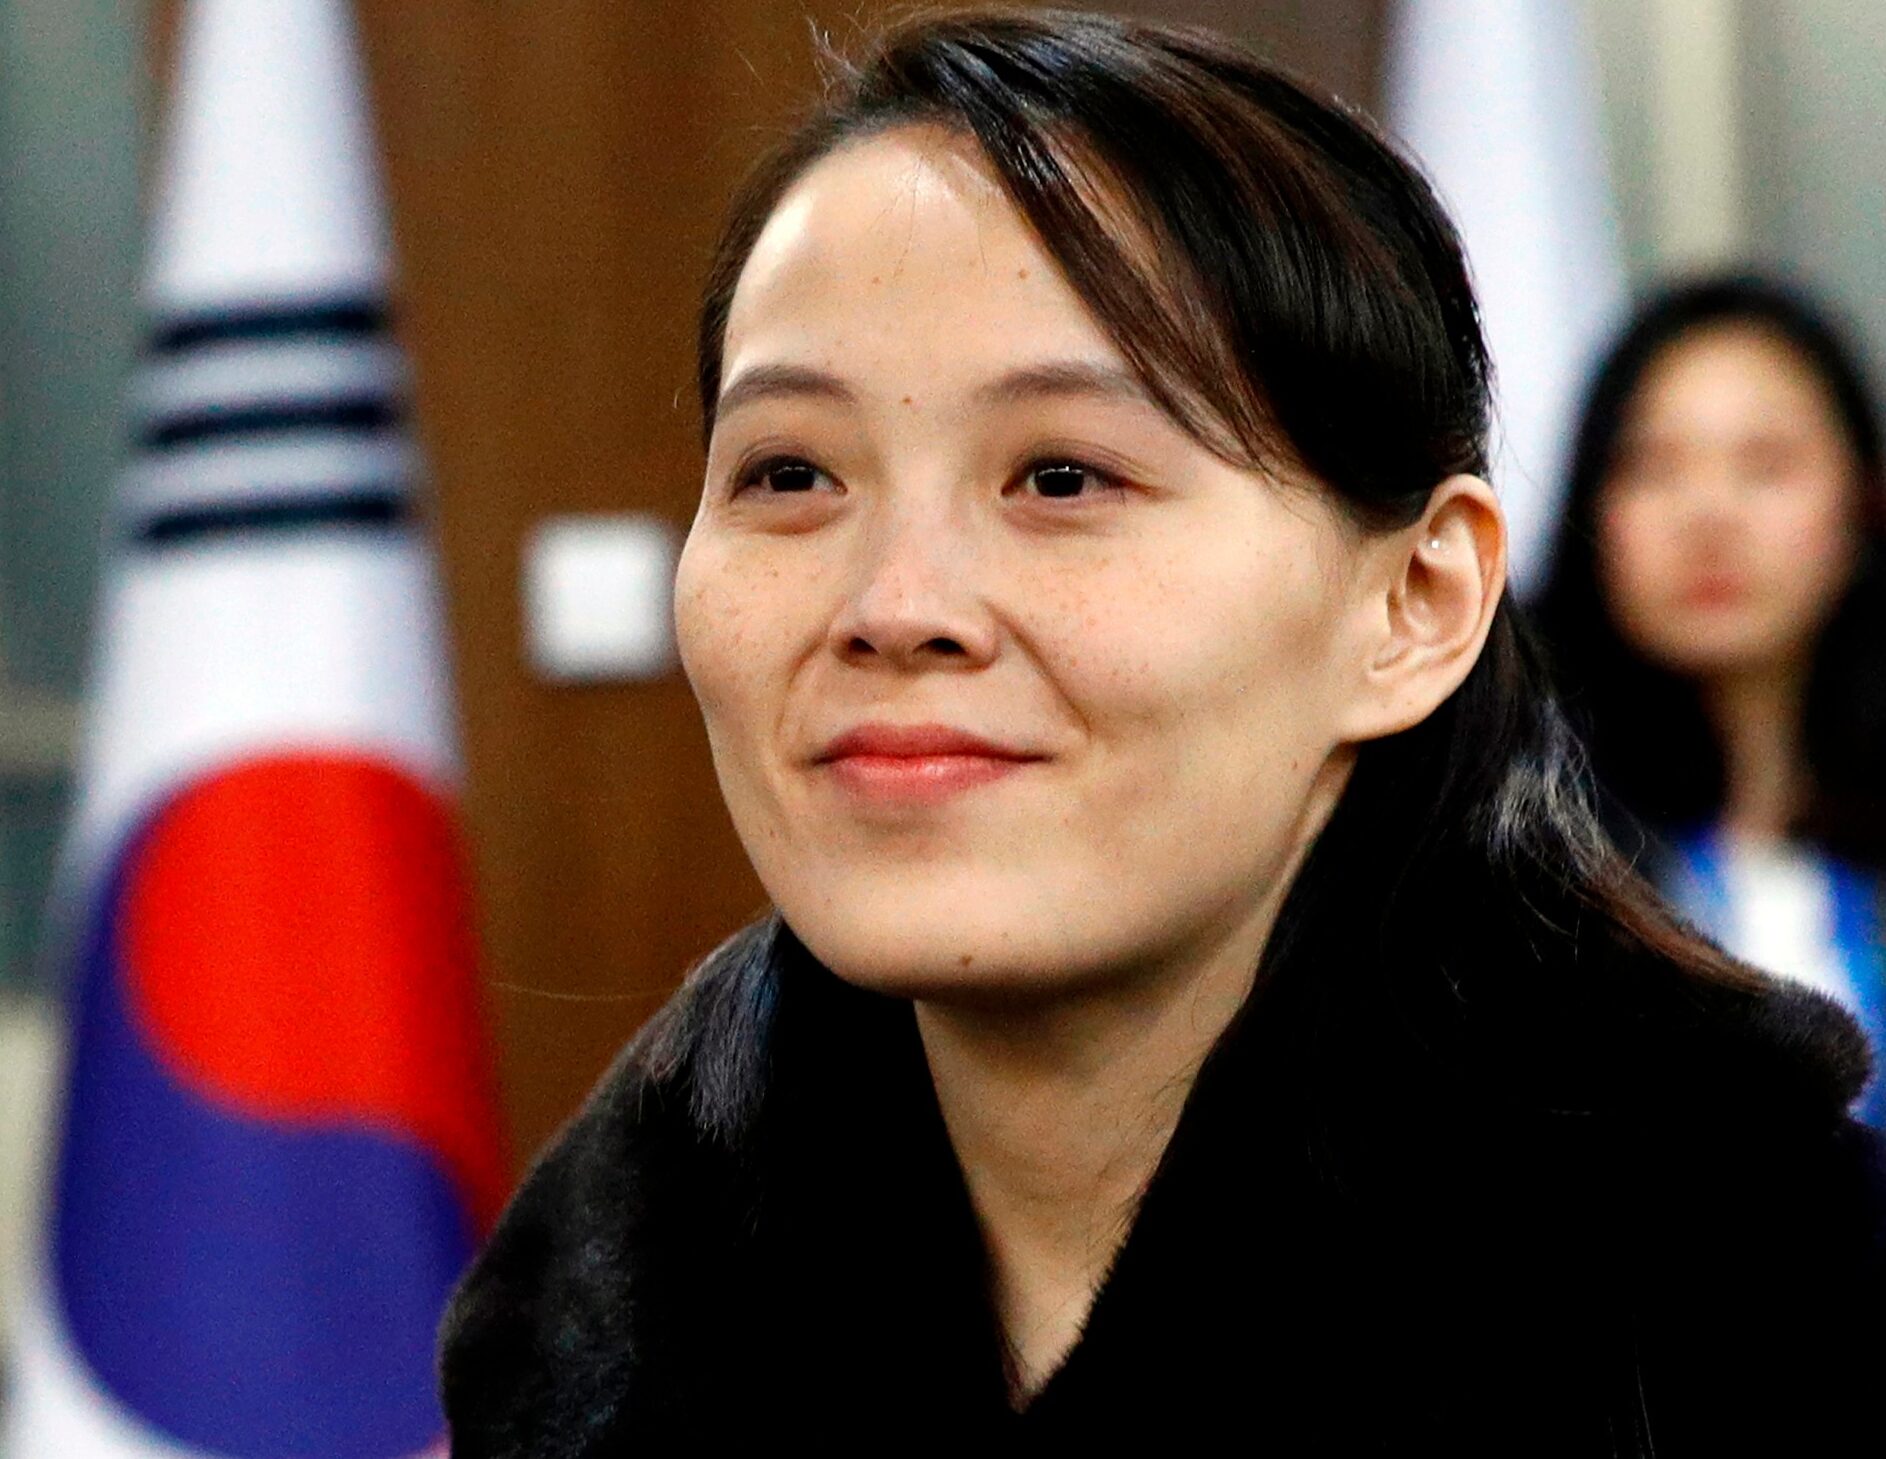 Demoted? Pushed Aside? Fate of Kim Jong Un’s Sister Unclear